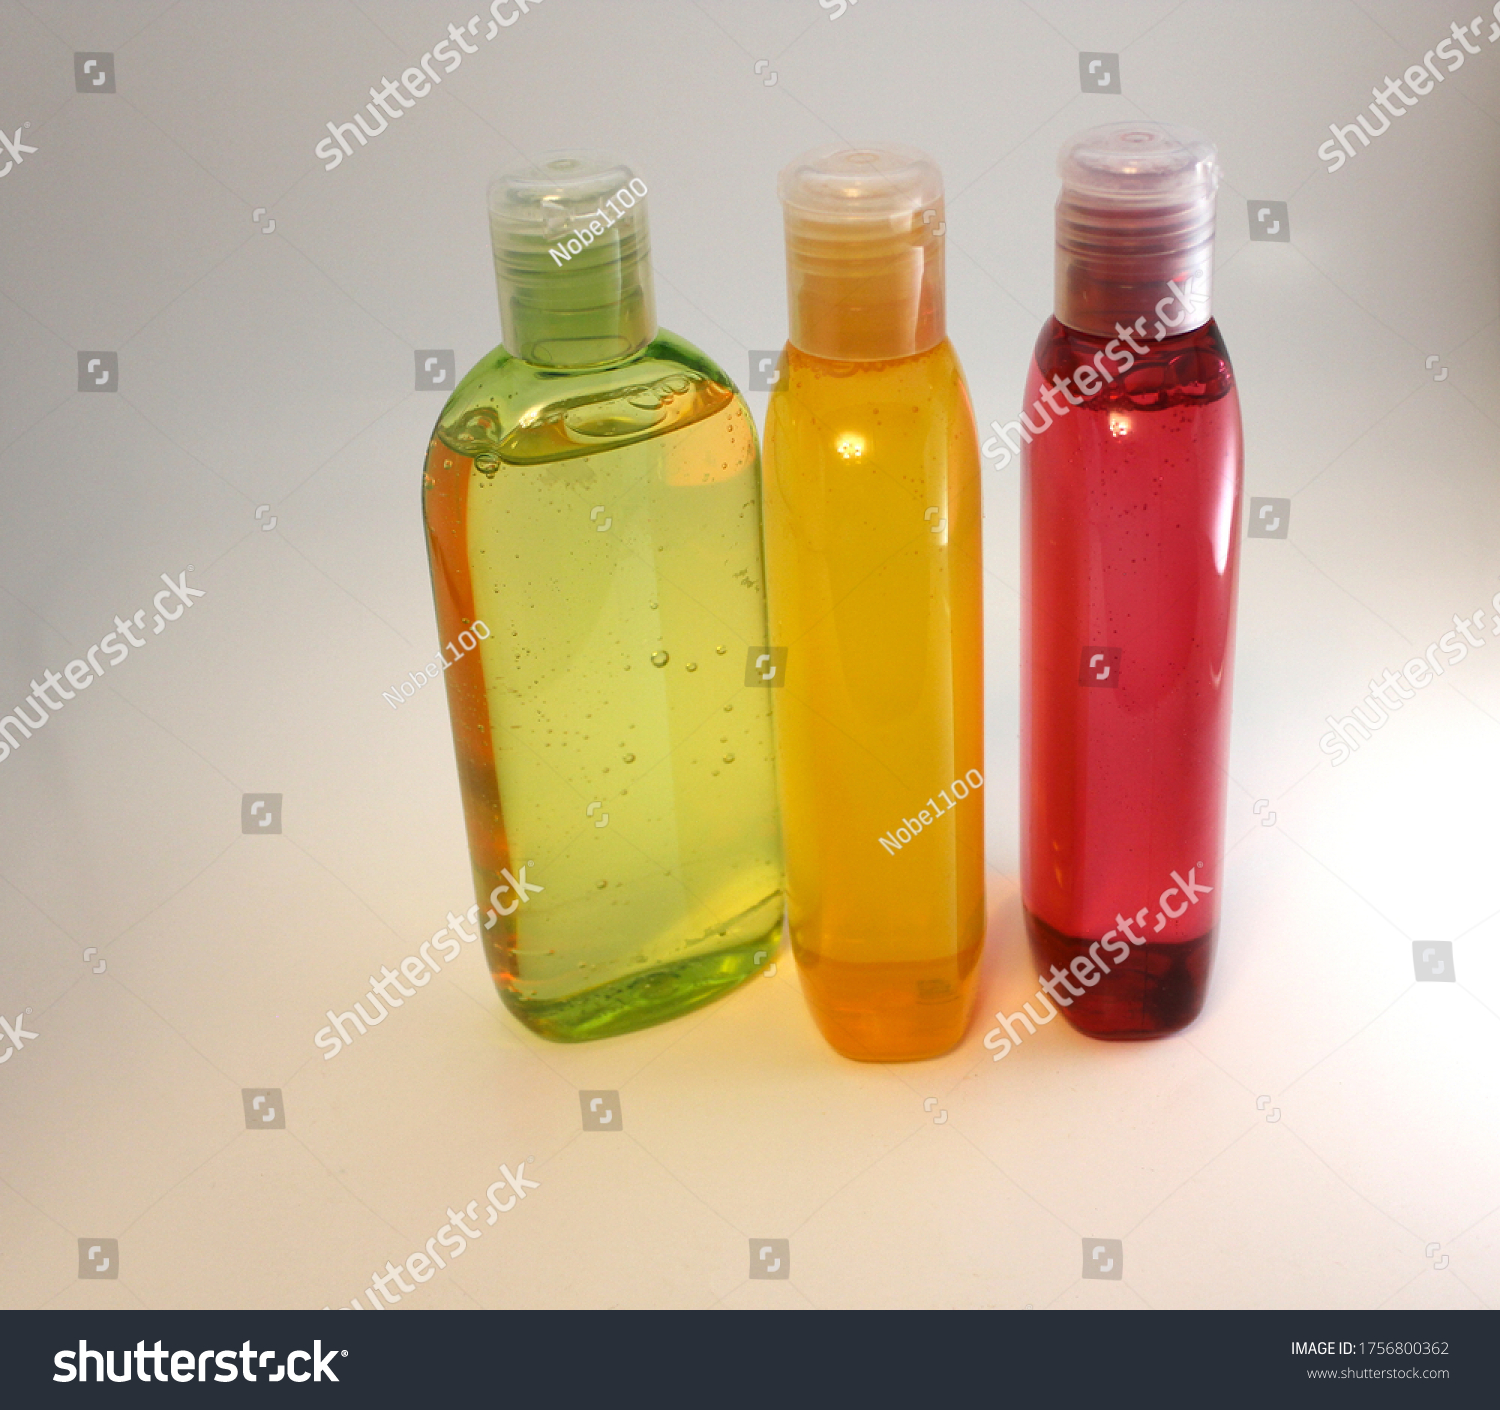 Download Shampoo Bottle Colorful Green Red Yellow Beauty Fashion Stock Image 1756800362 PSD Mockup Templates